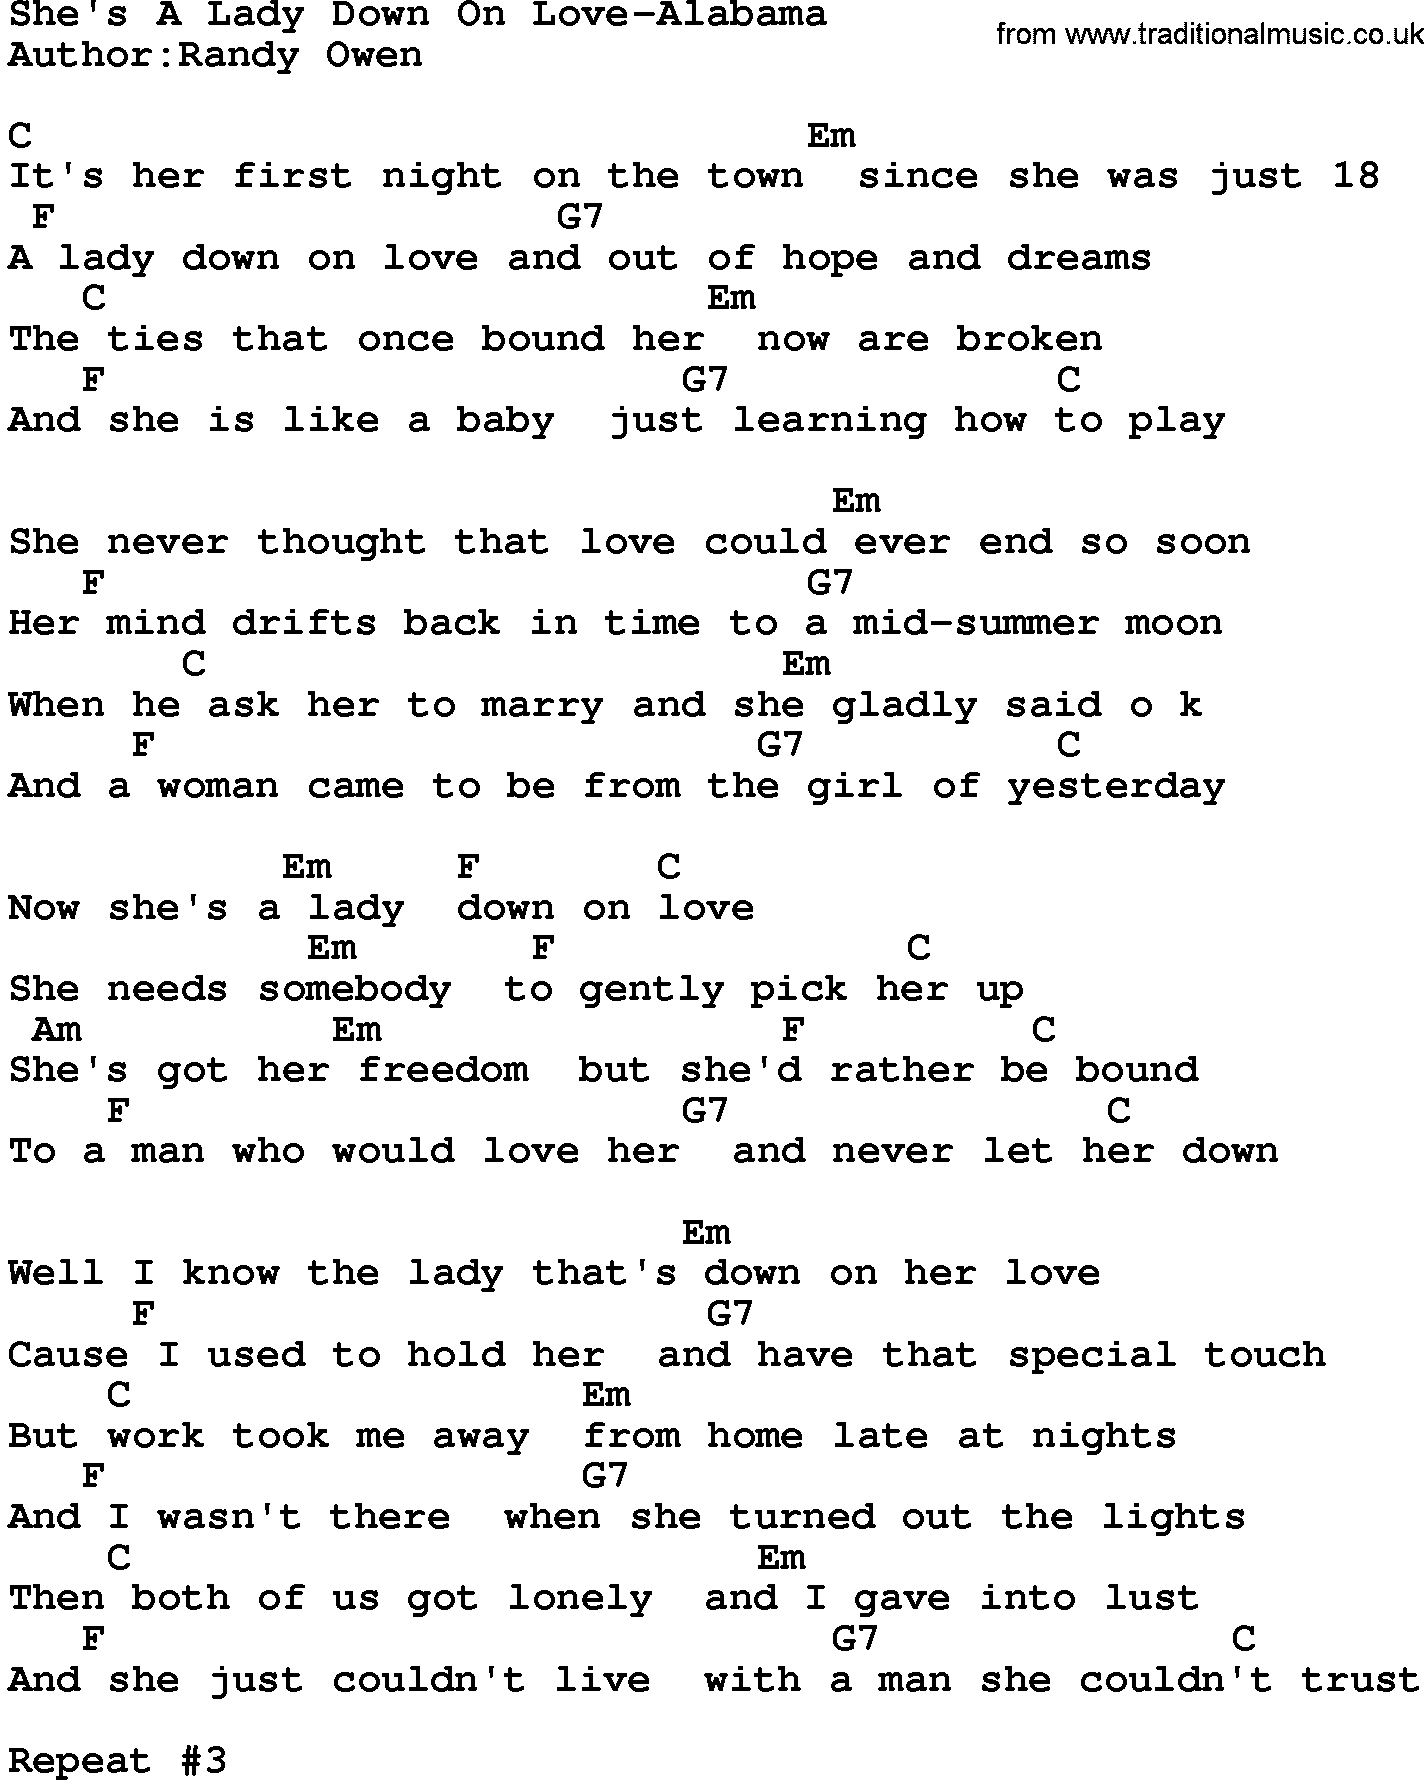 Country music song: She's A Lady Down On Love-Alabama lyrics and chords